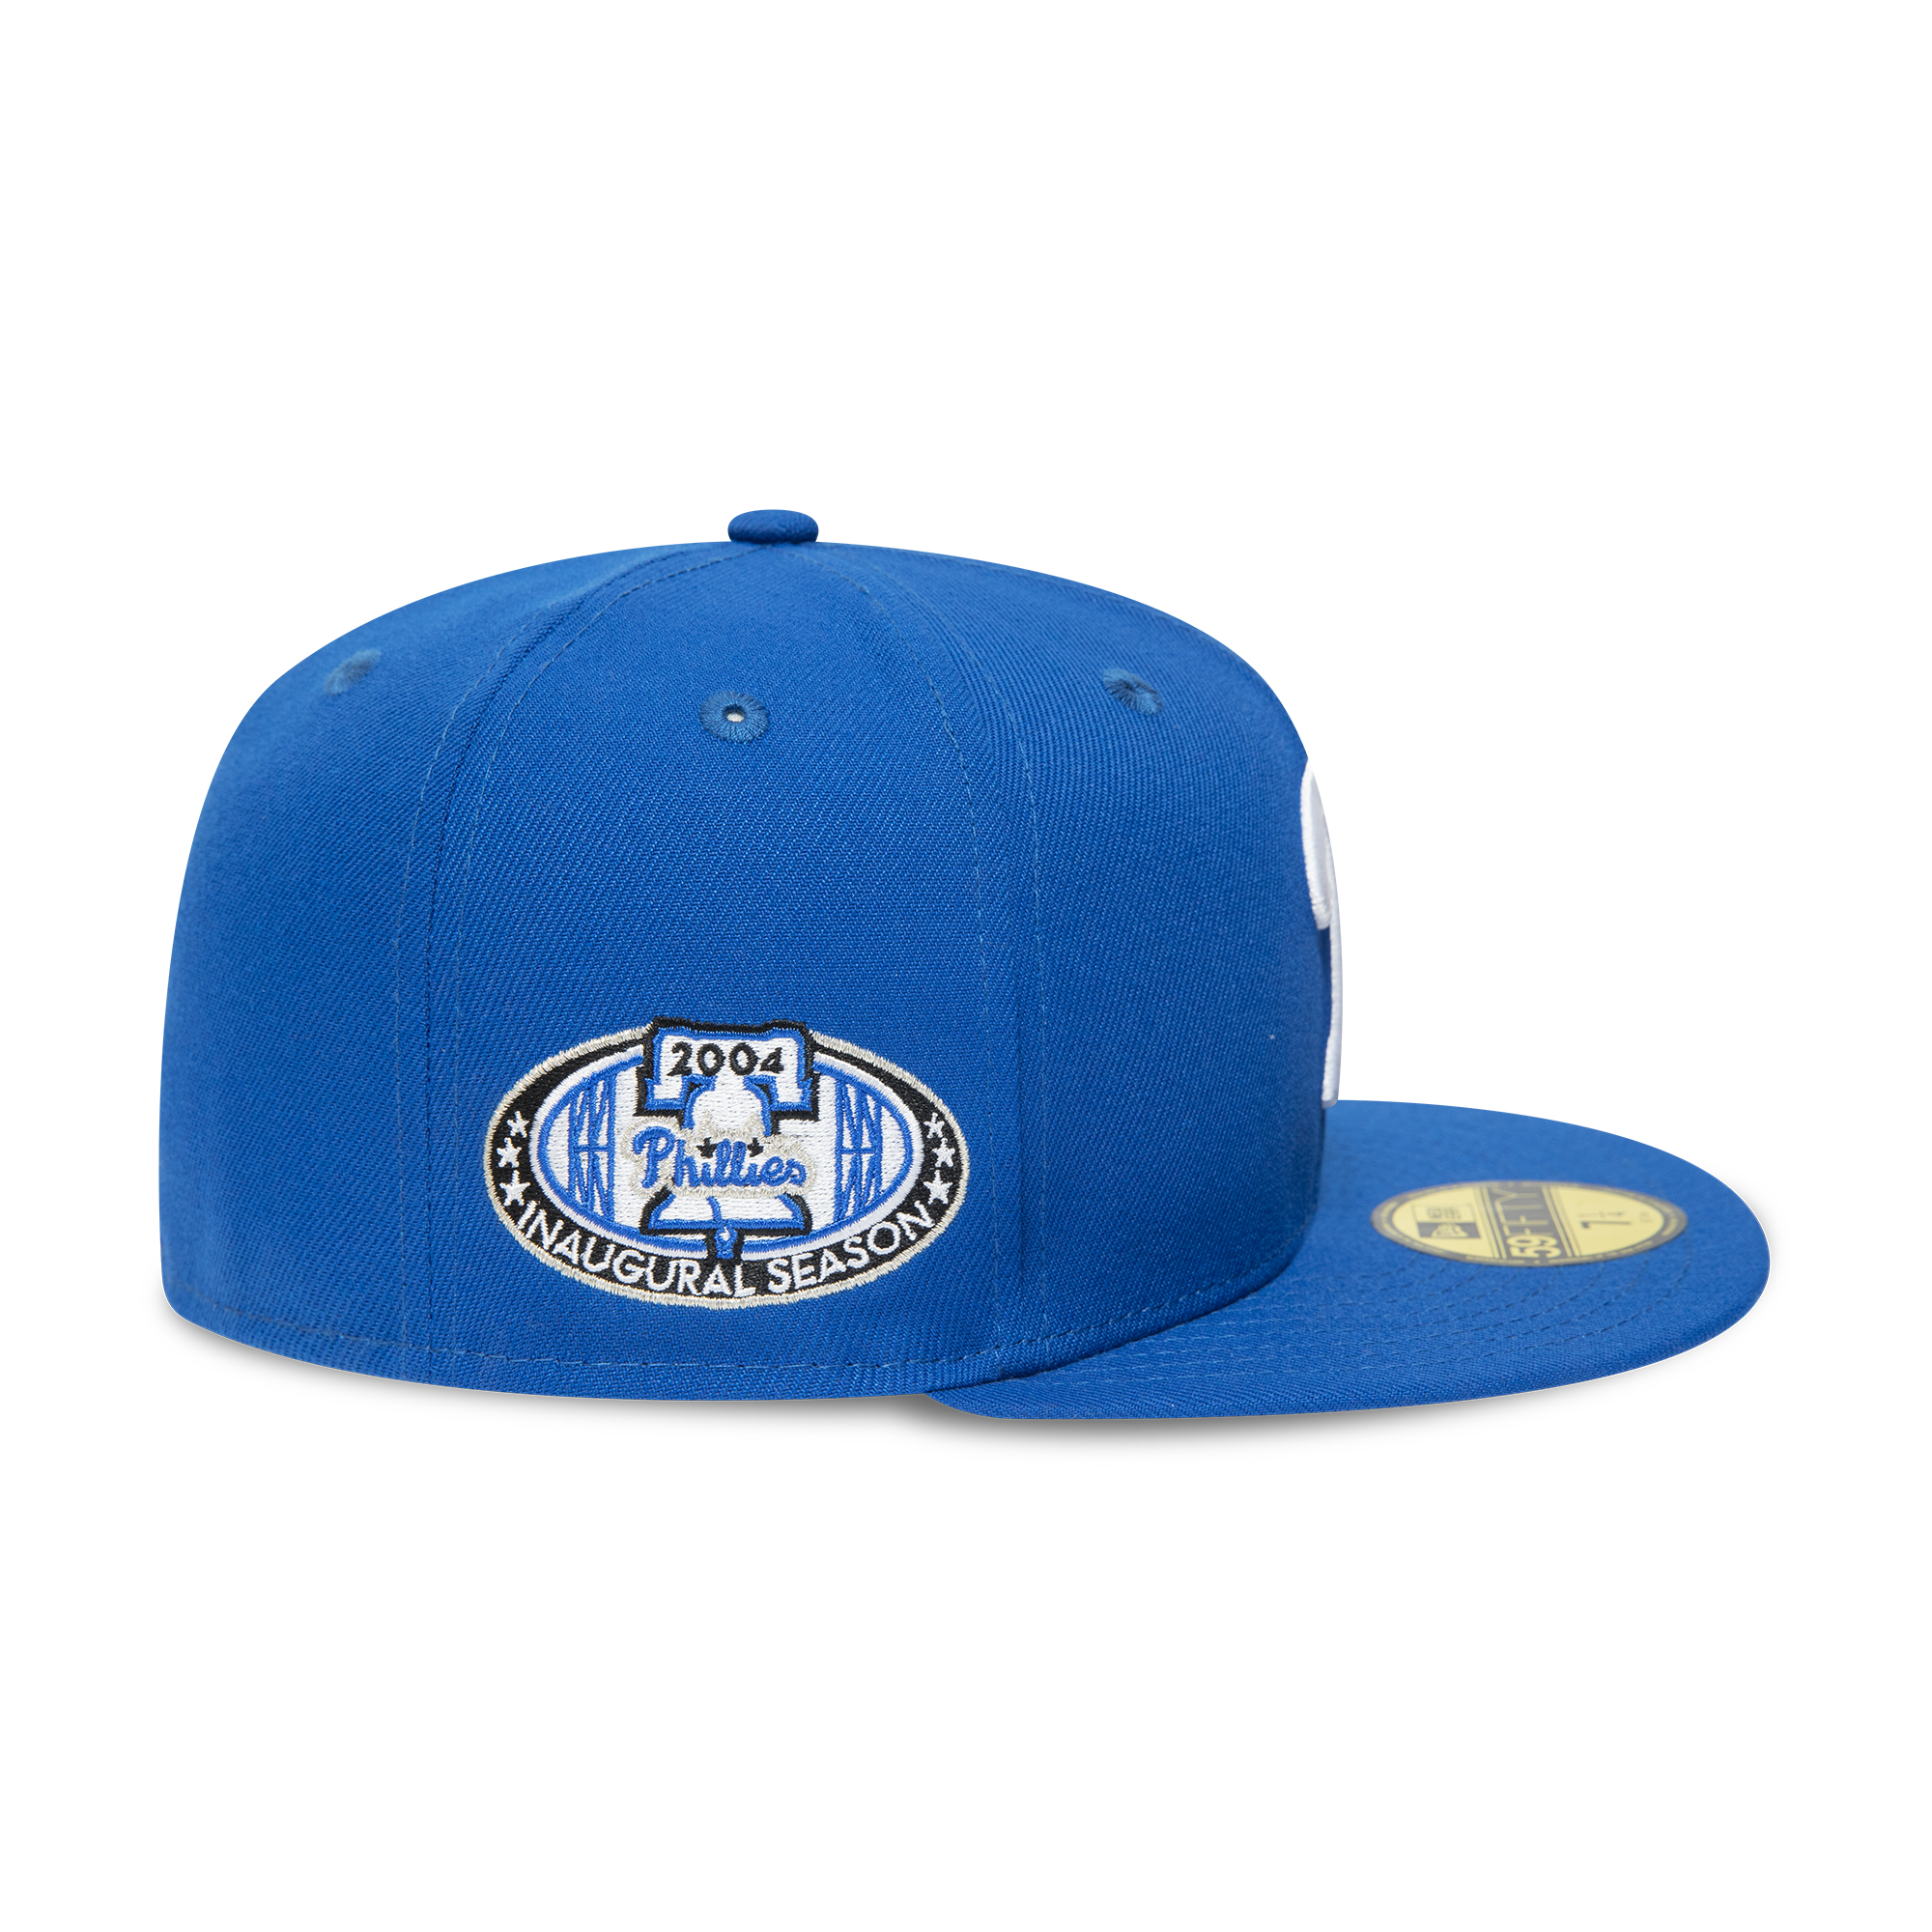 Philadelphia Phillies MLB Blues Blue 59FIFTY Fitted Cap